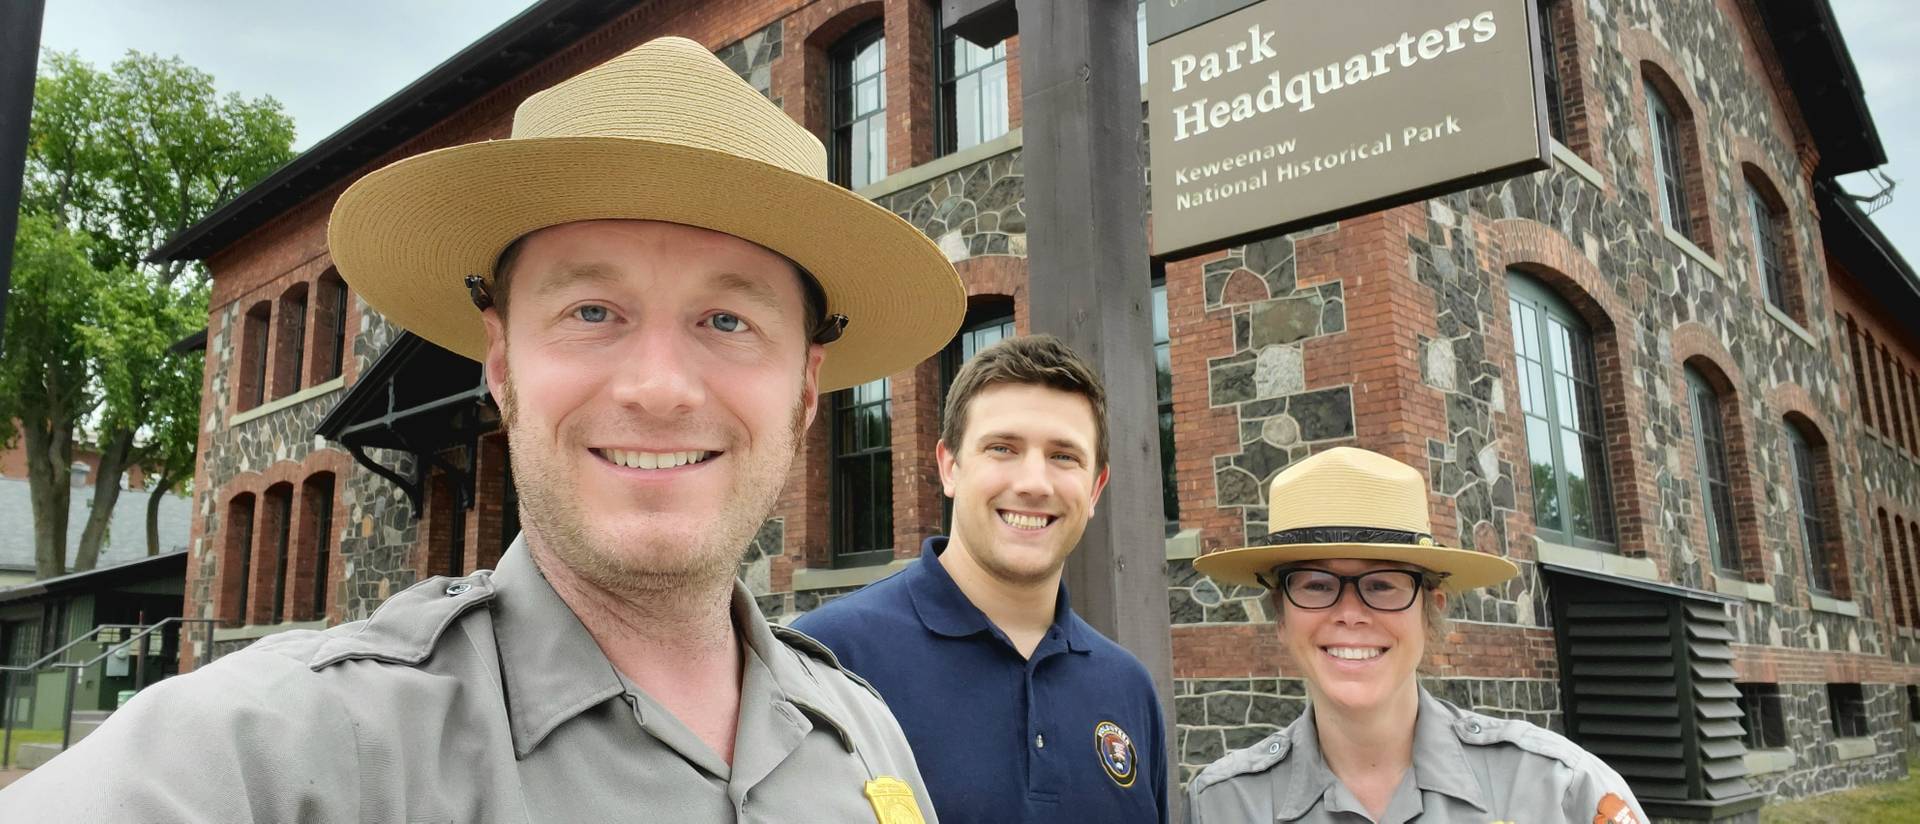 Two National Park Service staff in uniform and one Blugold student outside of a historic building in Michigan